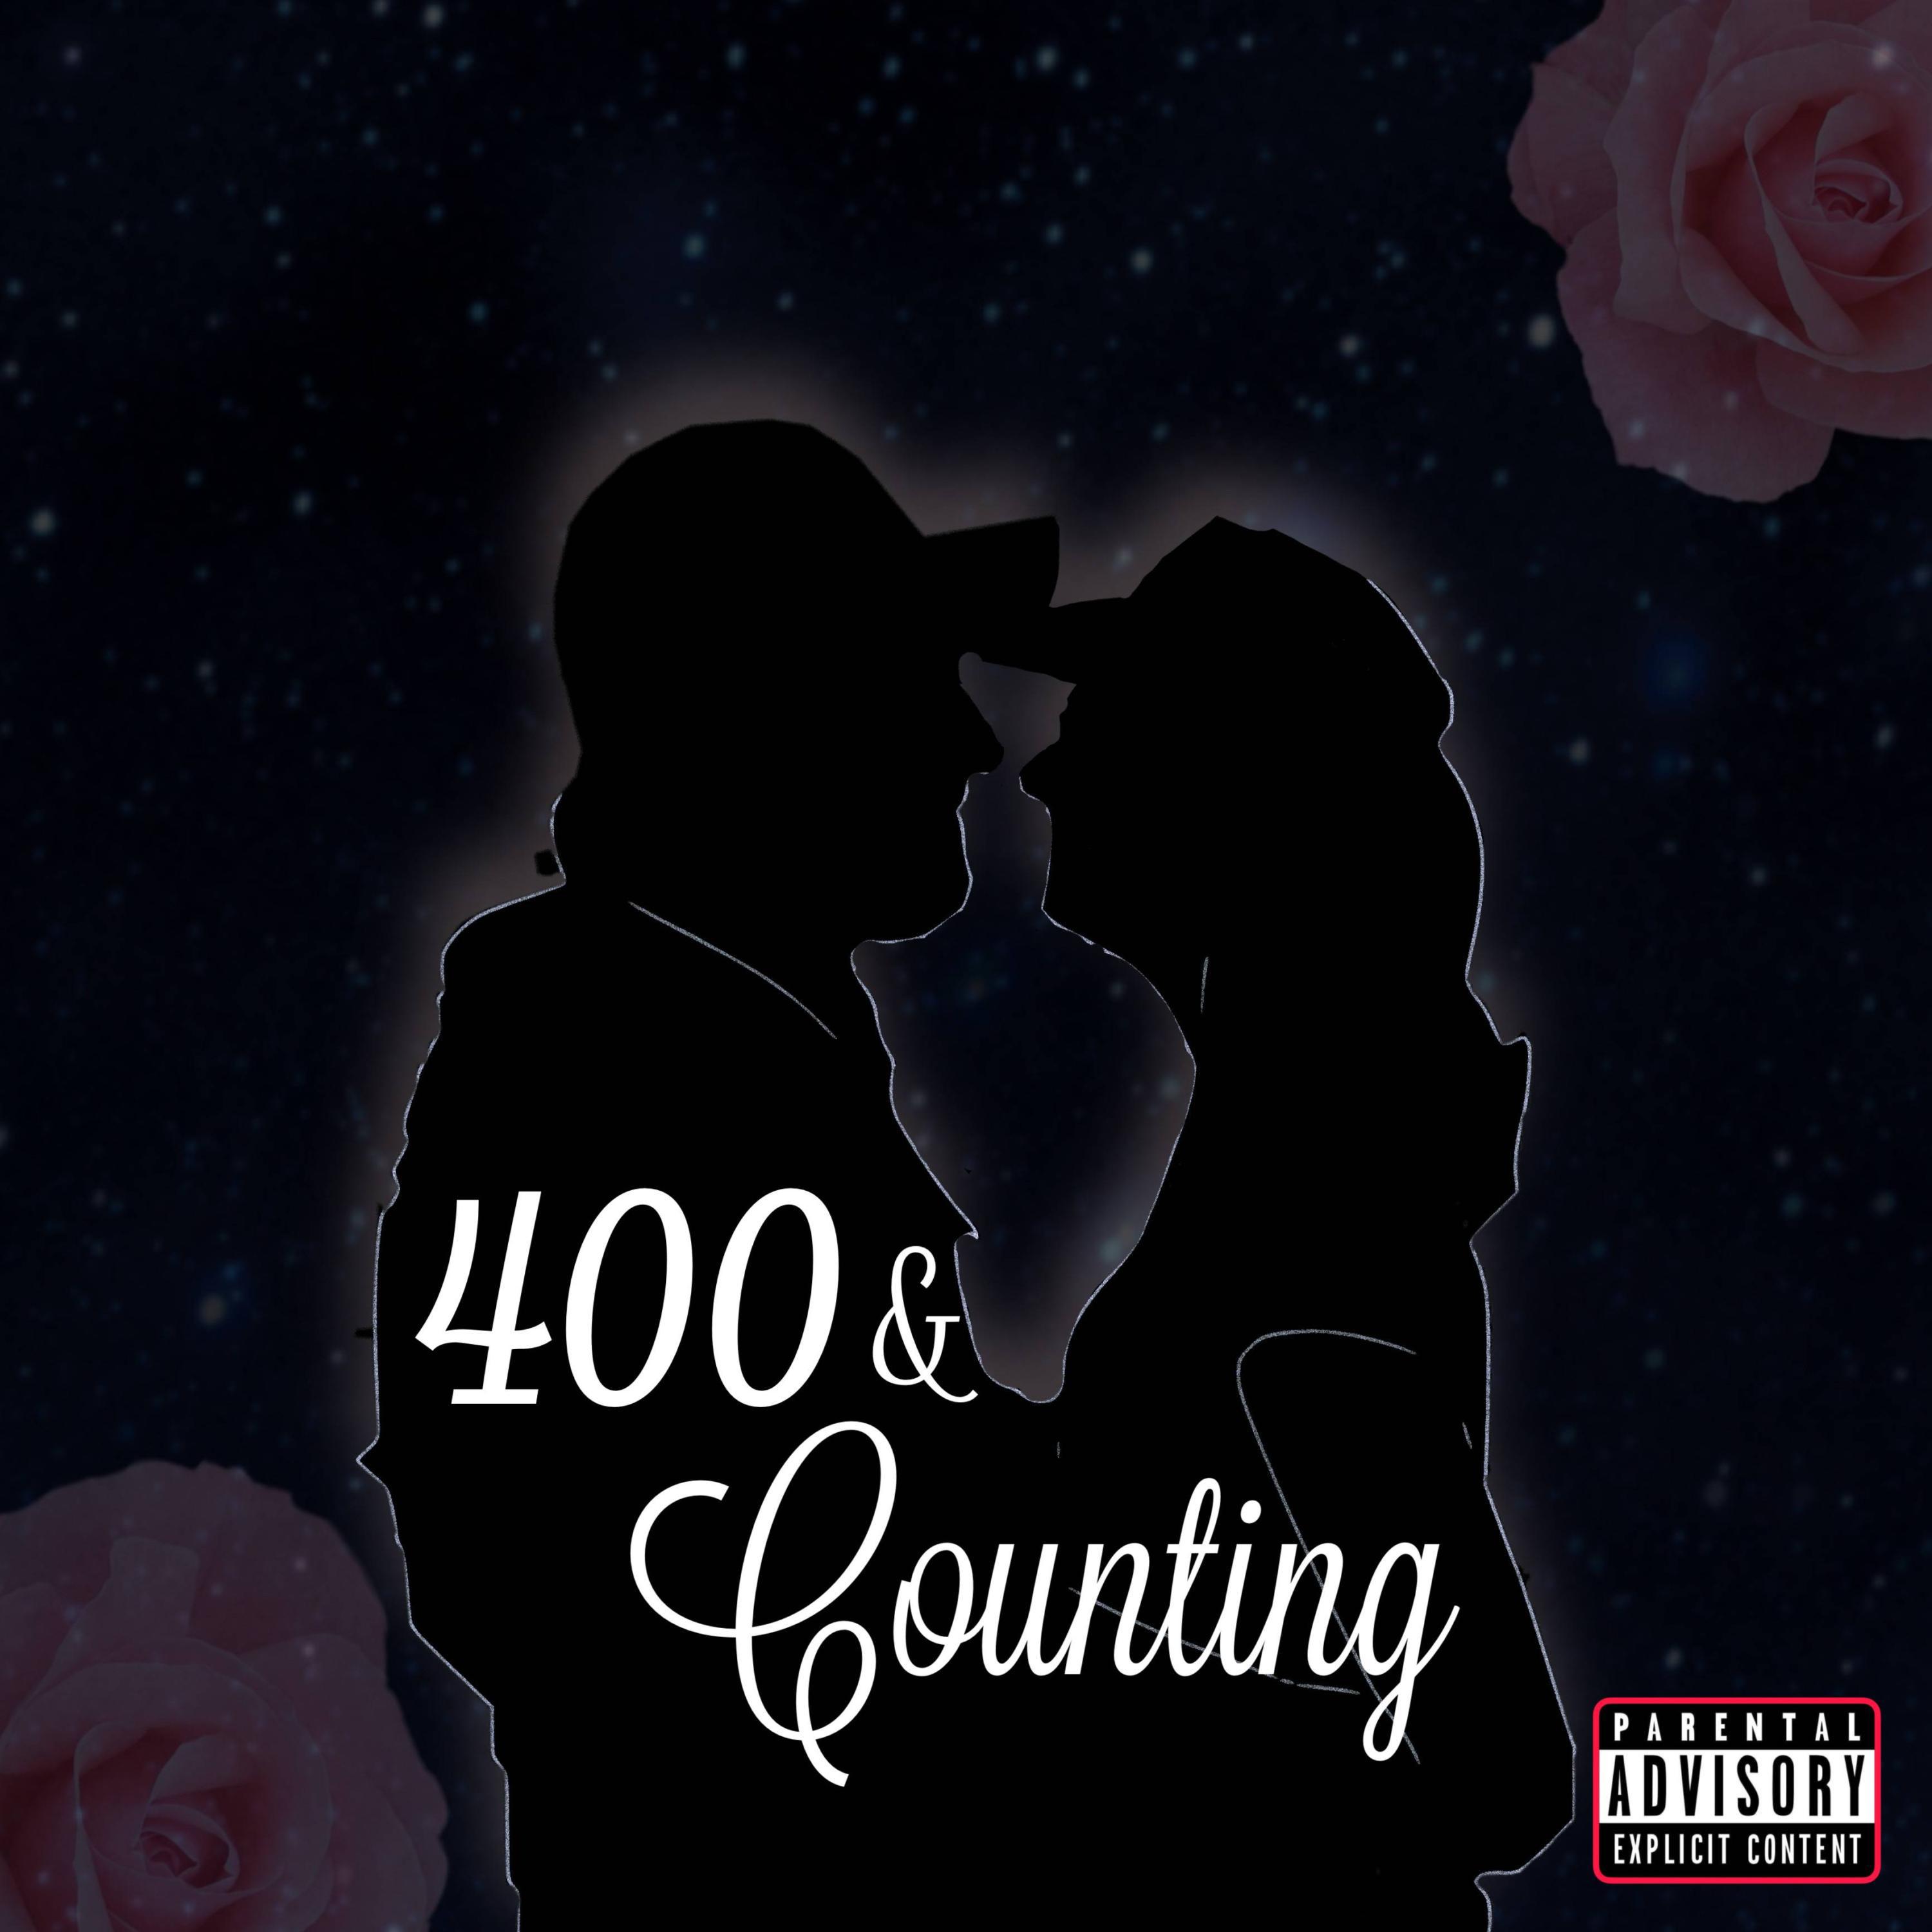 FAME. - 400 & Counting